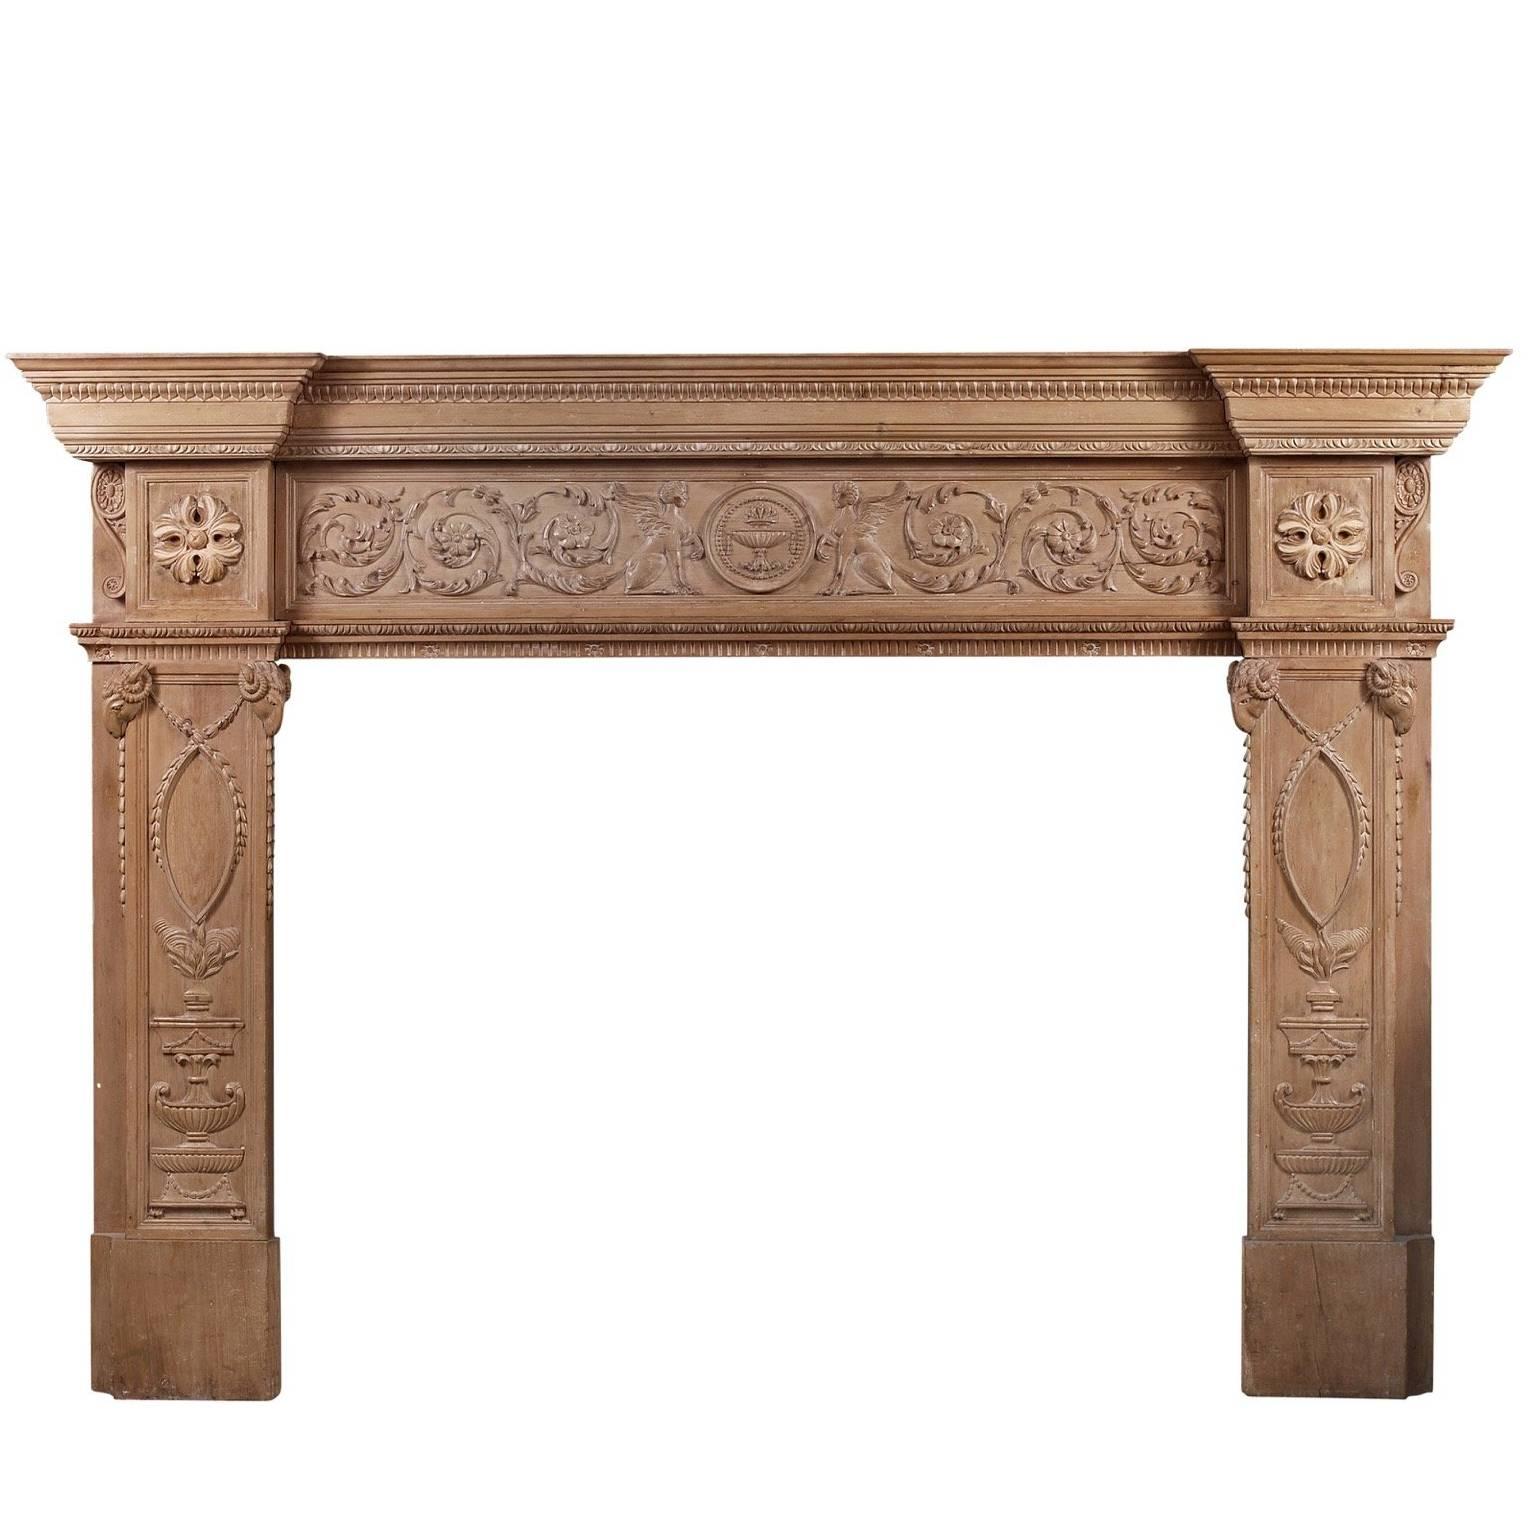 Imposing Period English Antique Regency Pine Fireplace For Sale